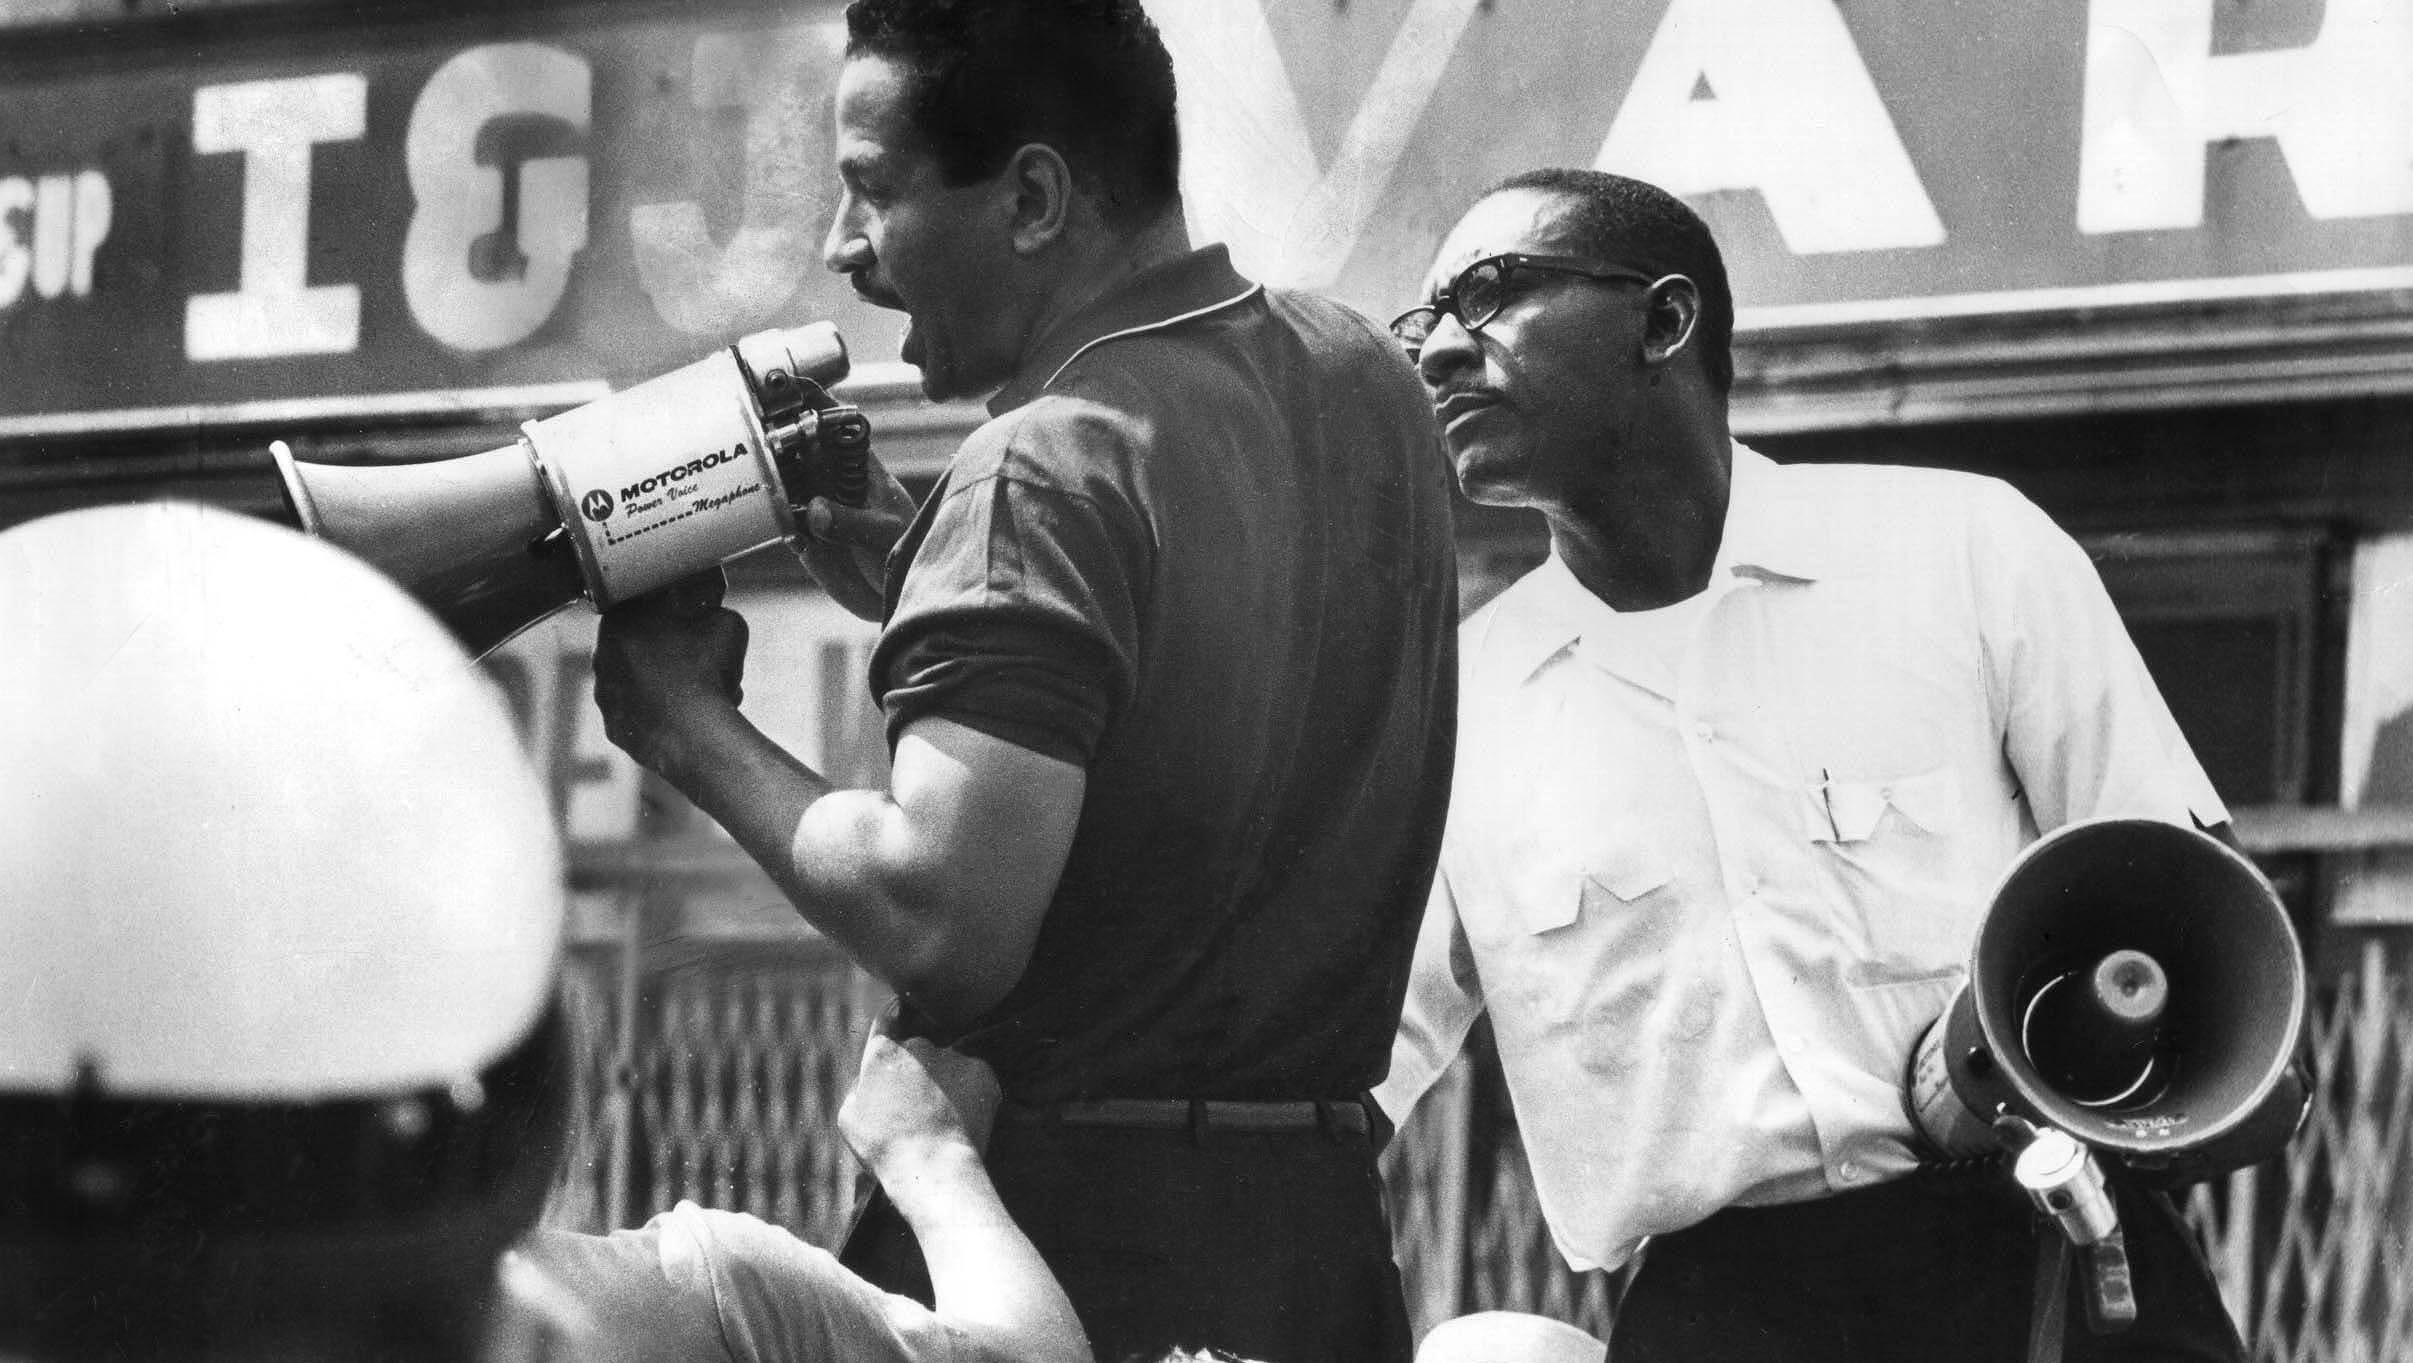 Rep. John Conyers addresses a crowd with a megaphone at 12th and Clairmount  during the 1967 Detroit riots. His pleas for peaceful protests went largely unheeded, but it cemented his reputation as a leader in the civil rights movement.